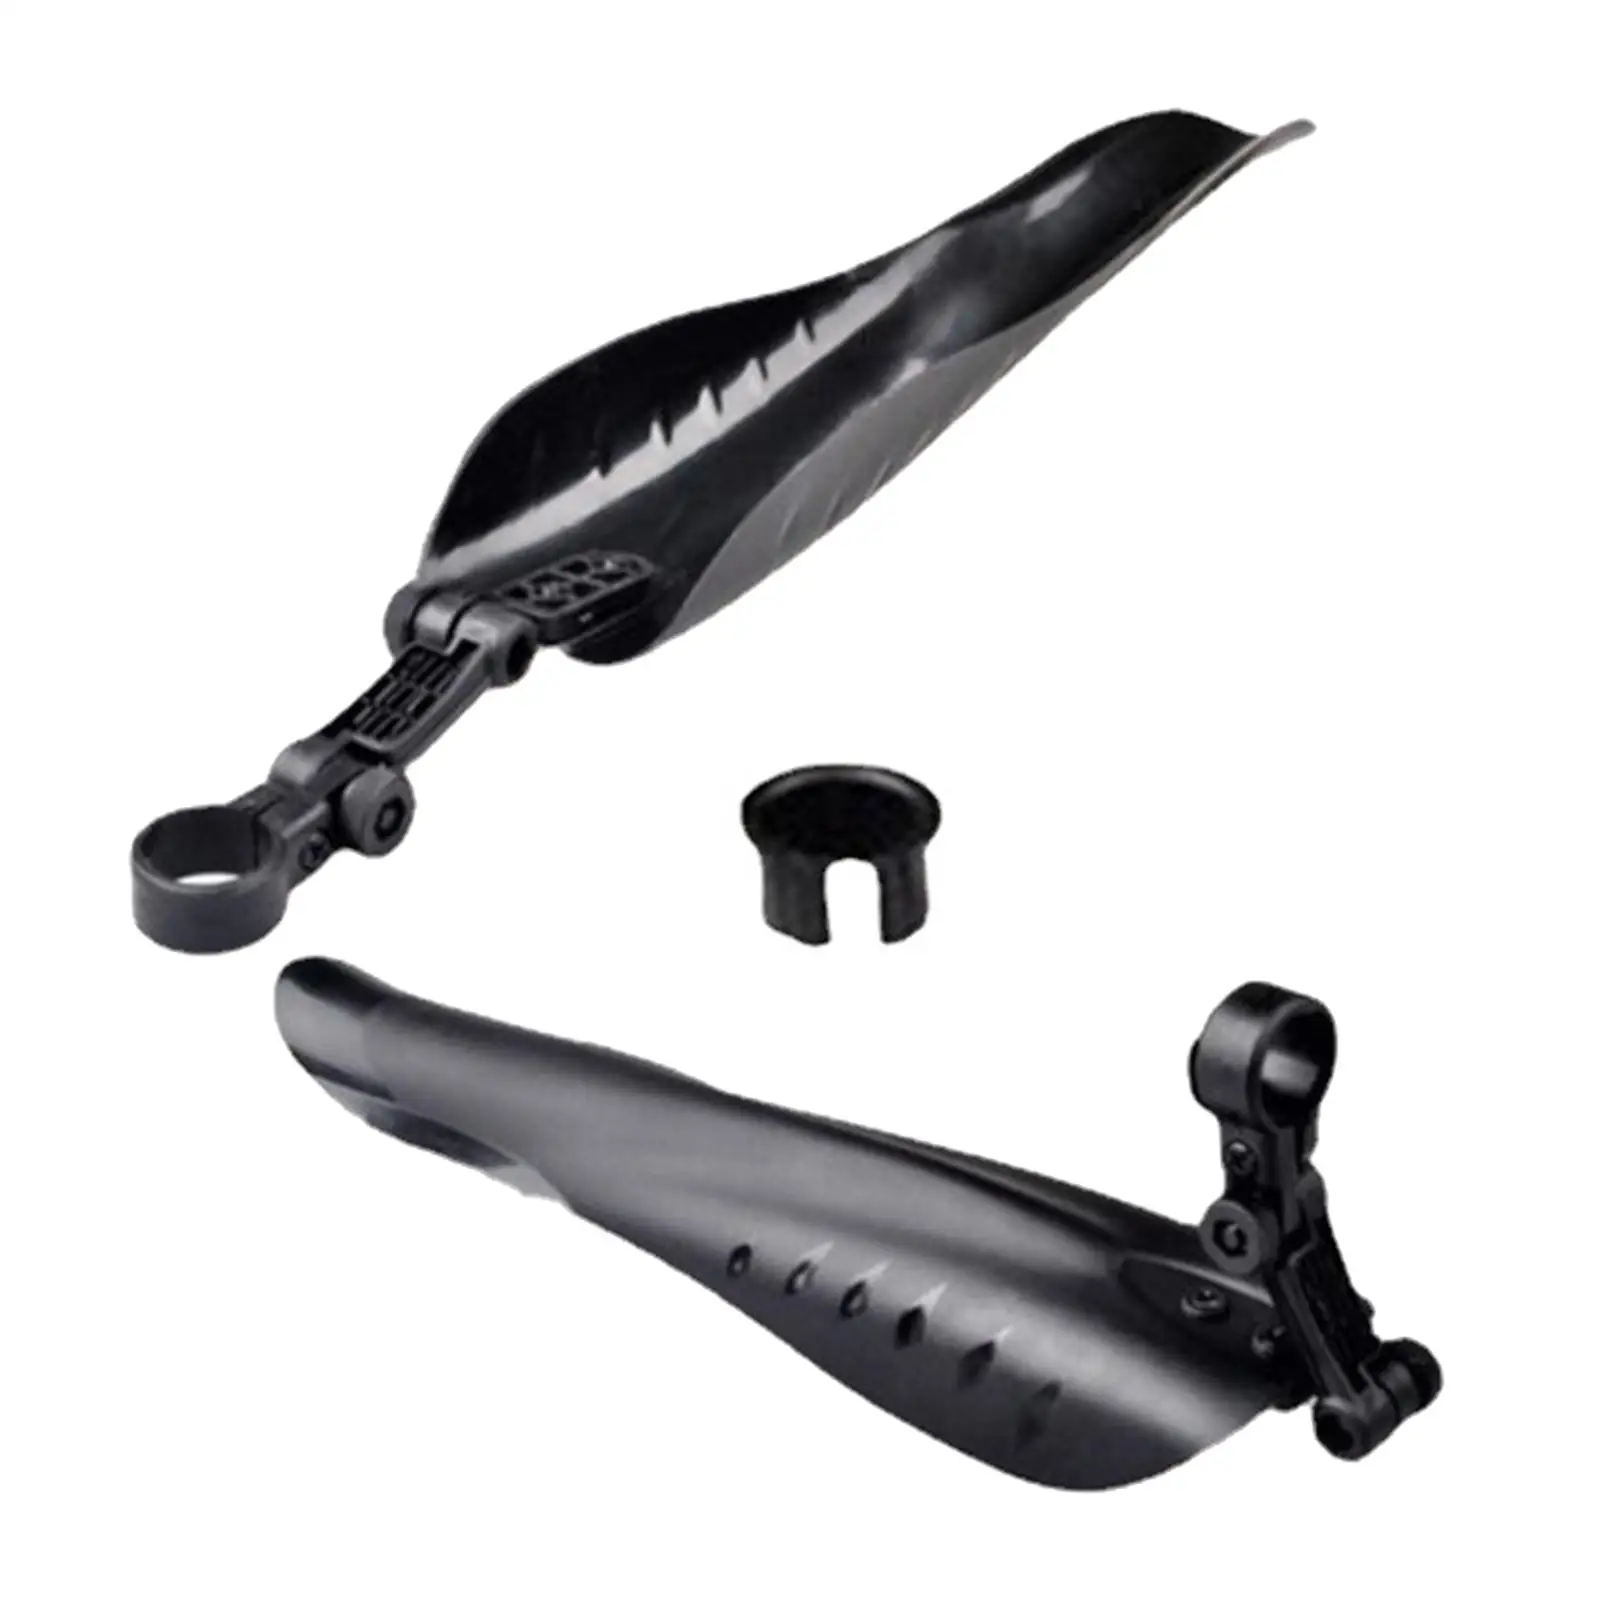 Bike Mudguard Adjustable Parts Thicken Accessories Front Rear Set for Road Bike